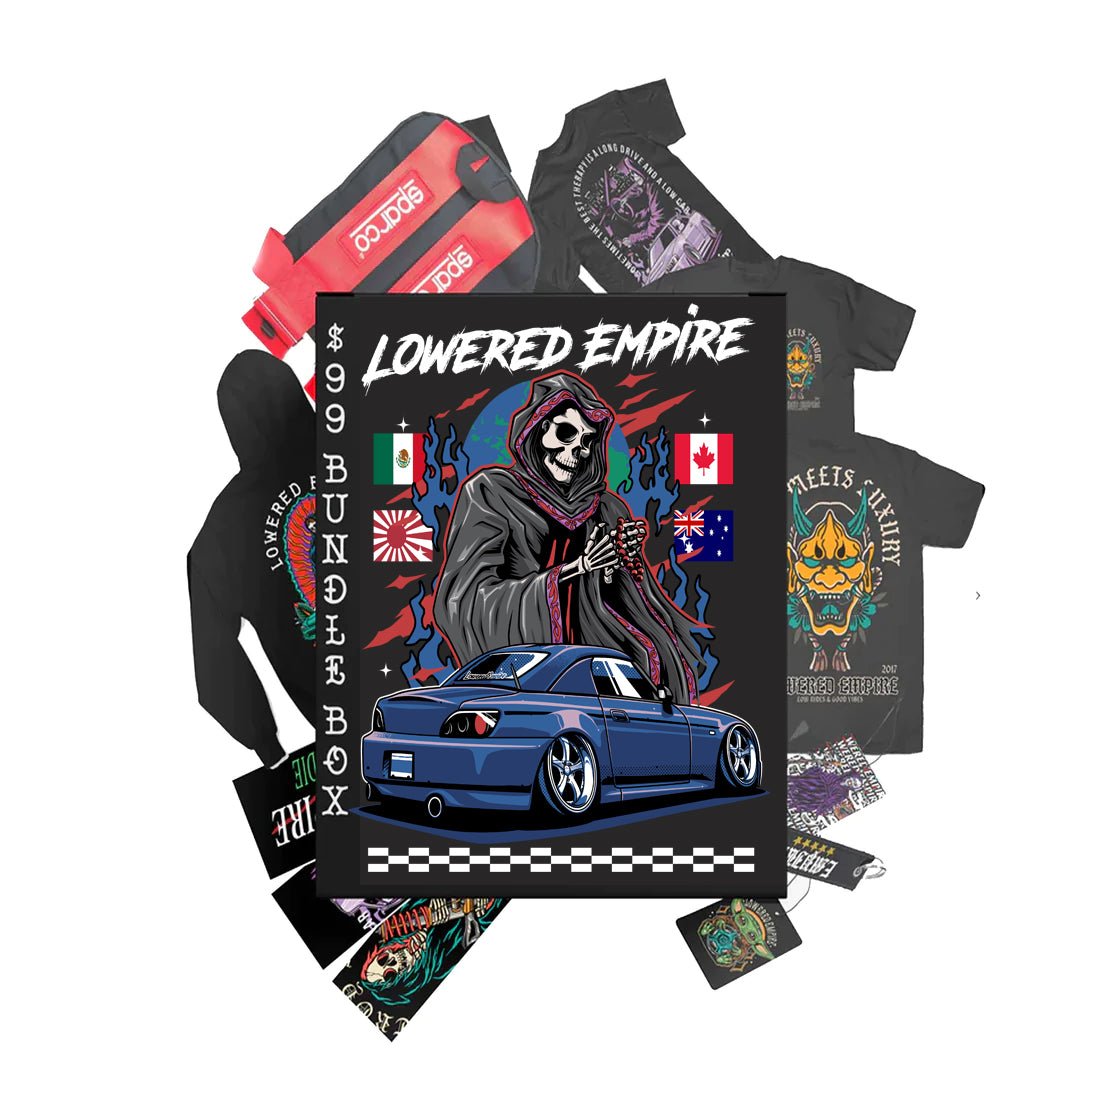 LOWERED EMPIRE MYSTERY BOX - 10 ITEMS FOR $99! No Coupon Codes allowed. - Loweredempire